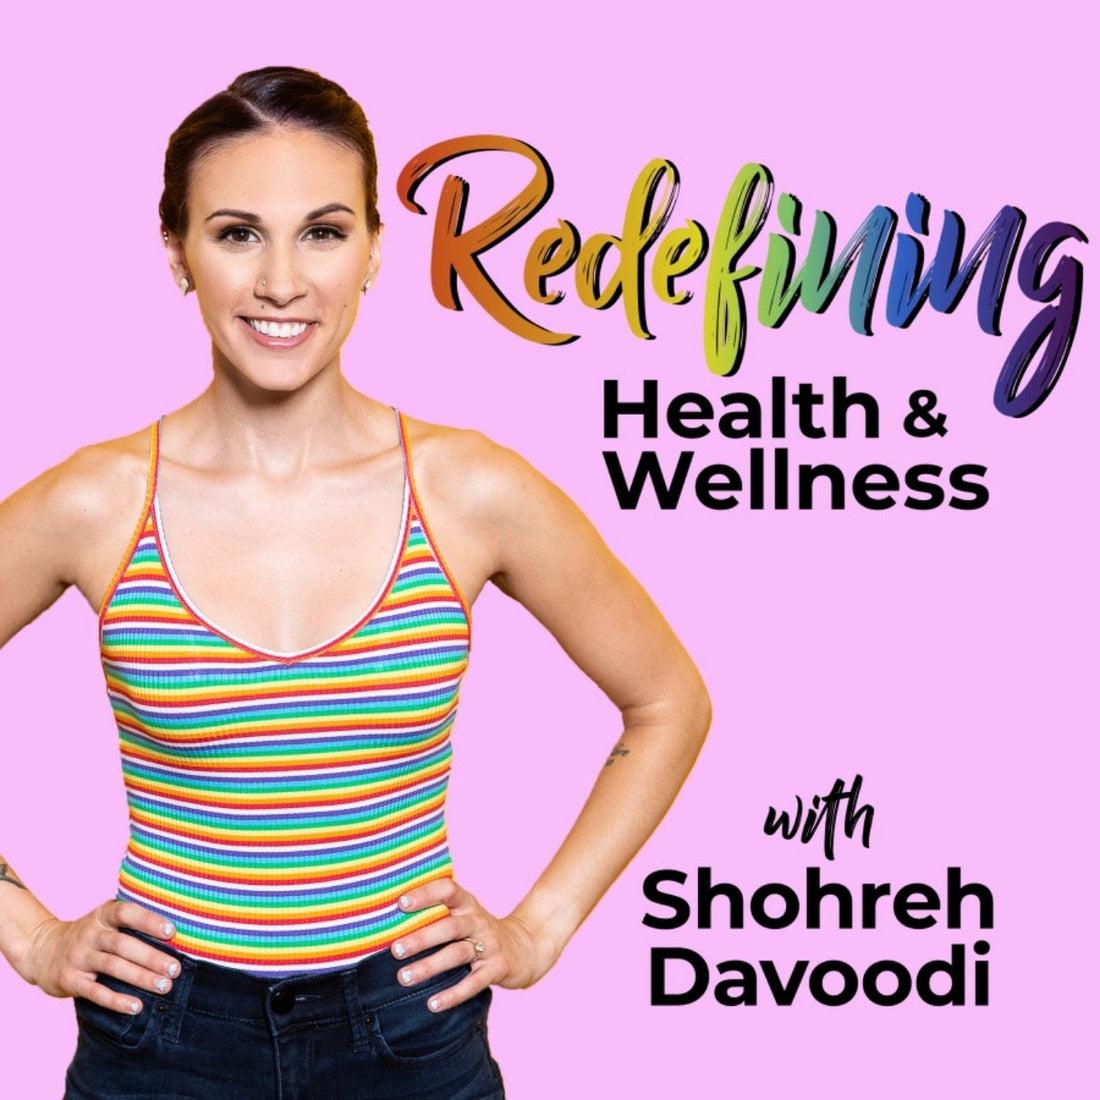 Redefining Health and Wellness with Shohreh Davoodi